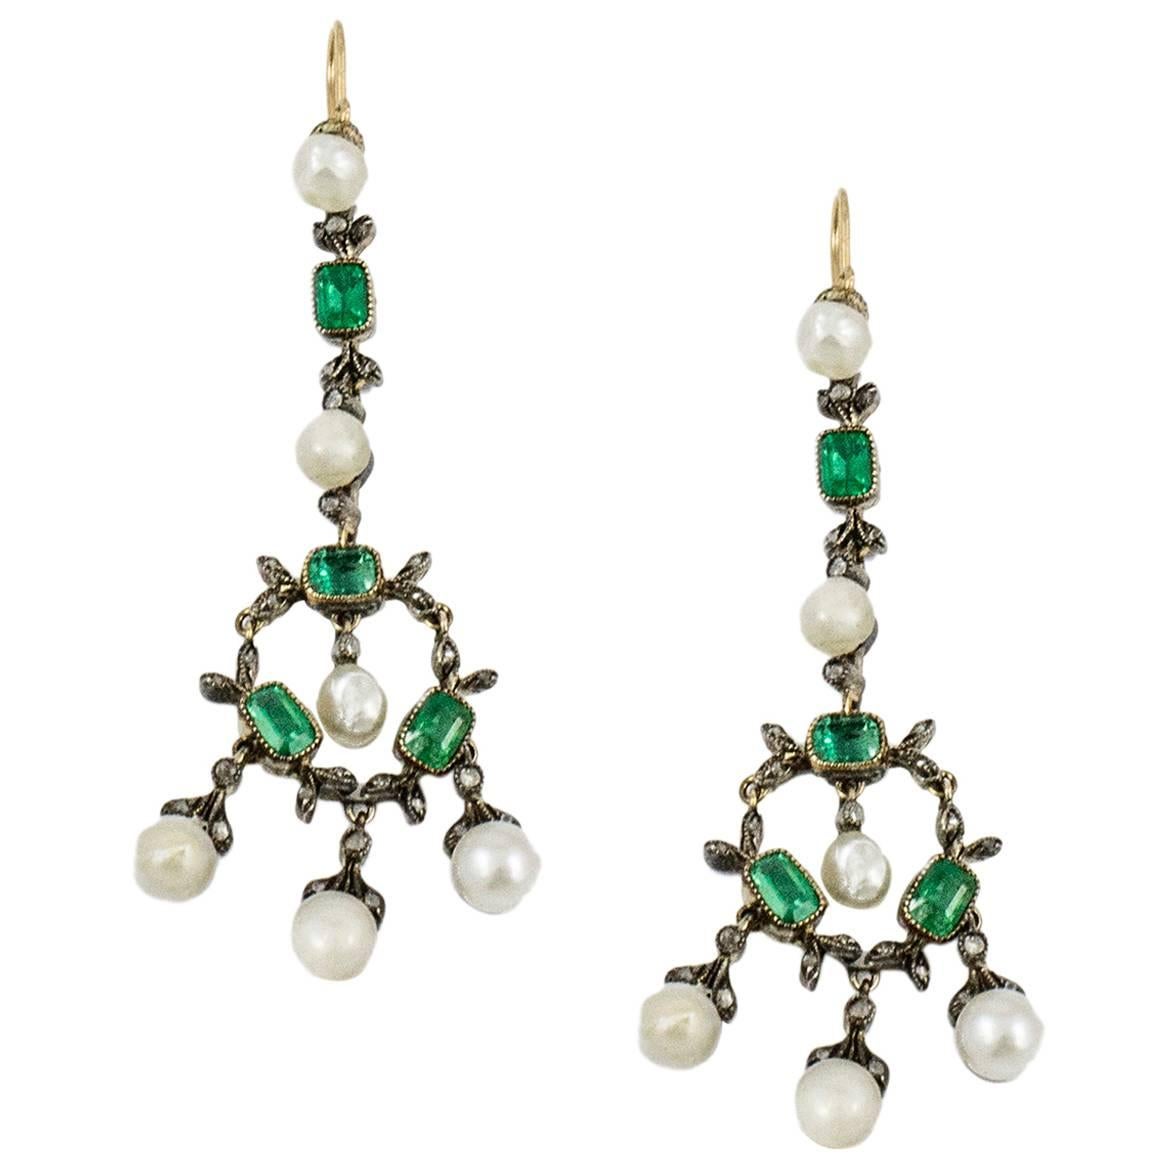 Antique Emerald and Pearl Earrings